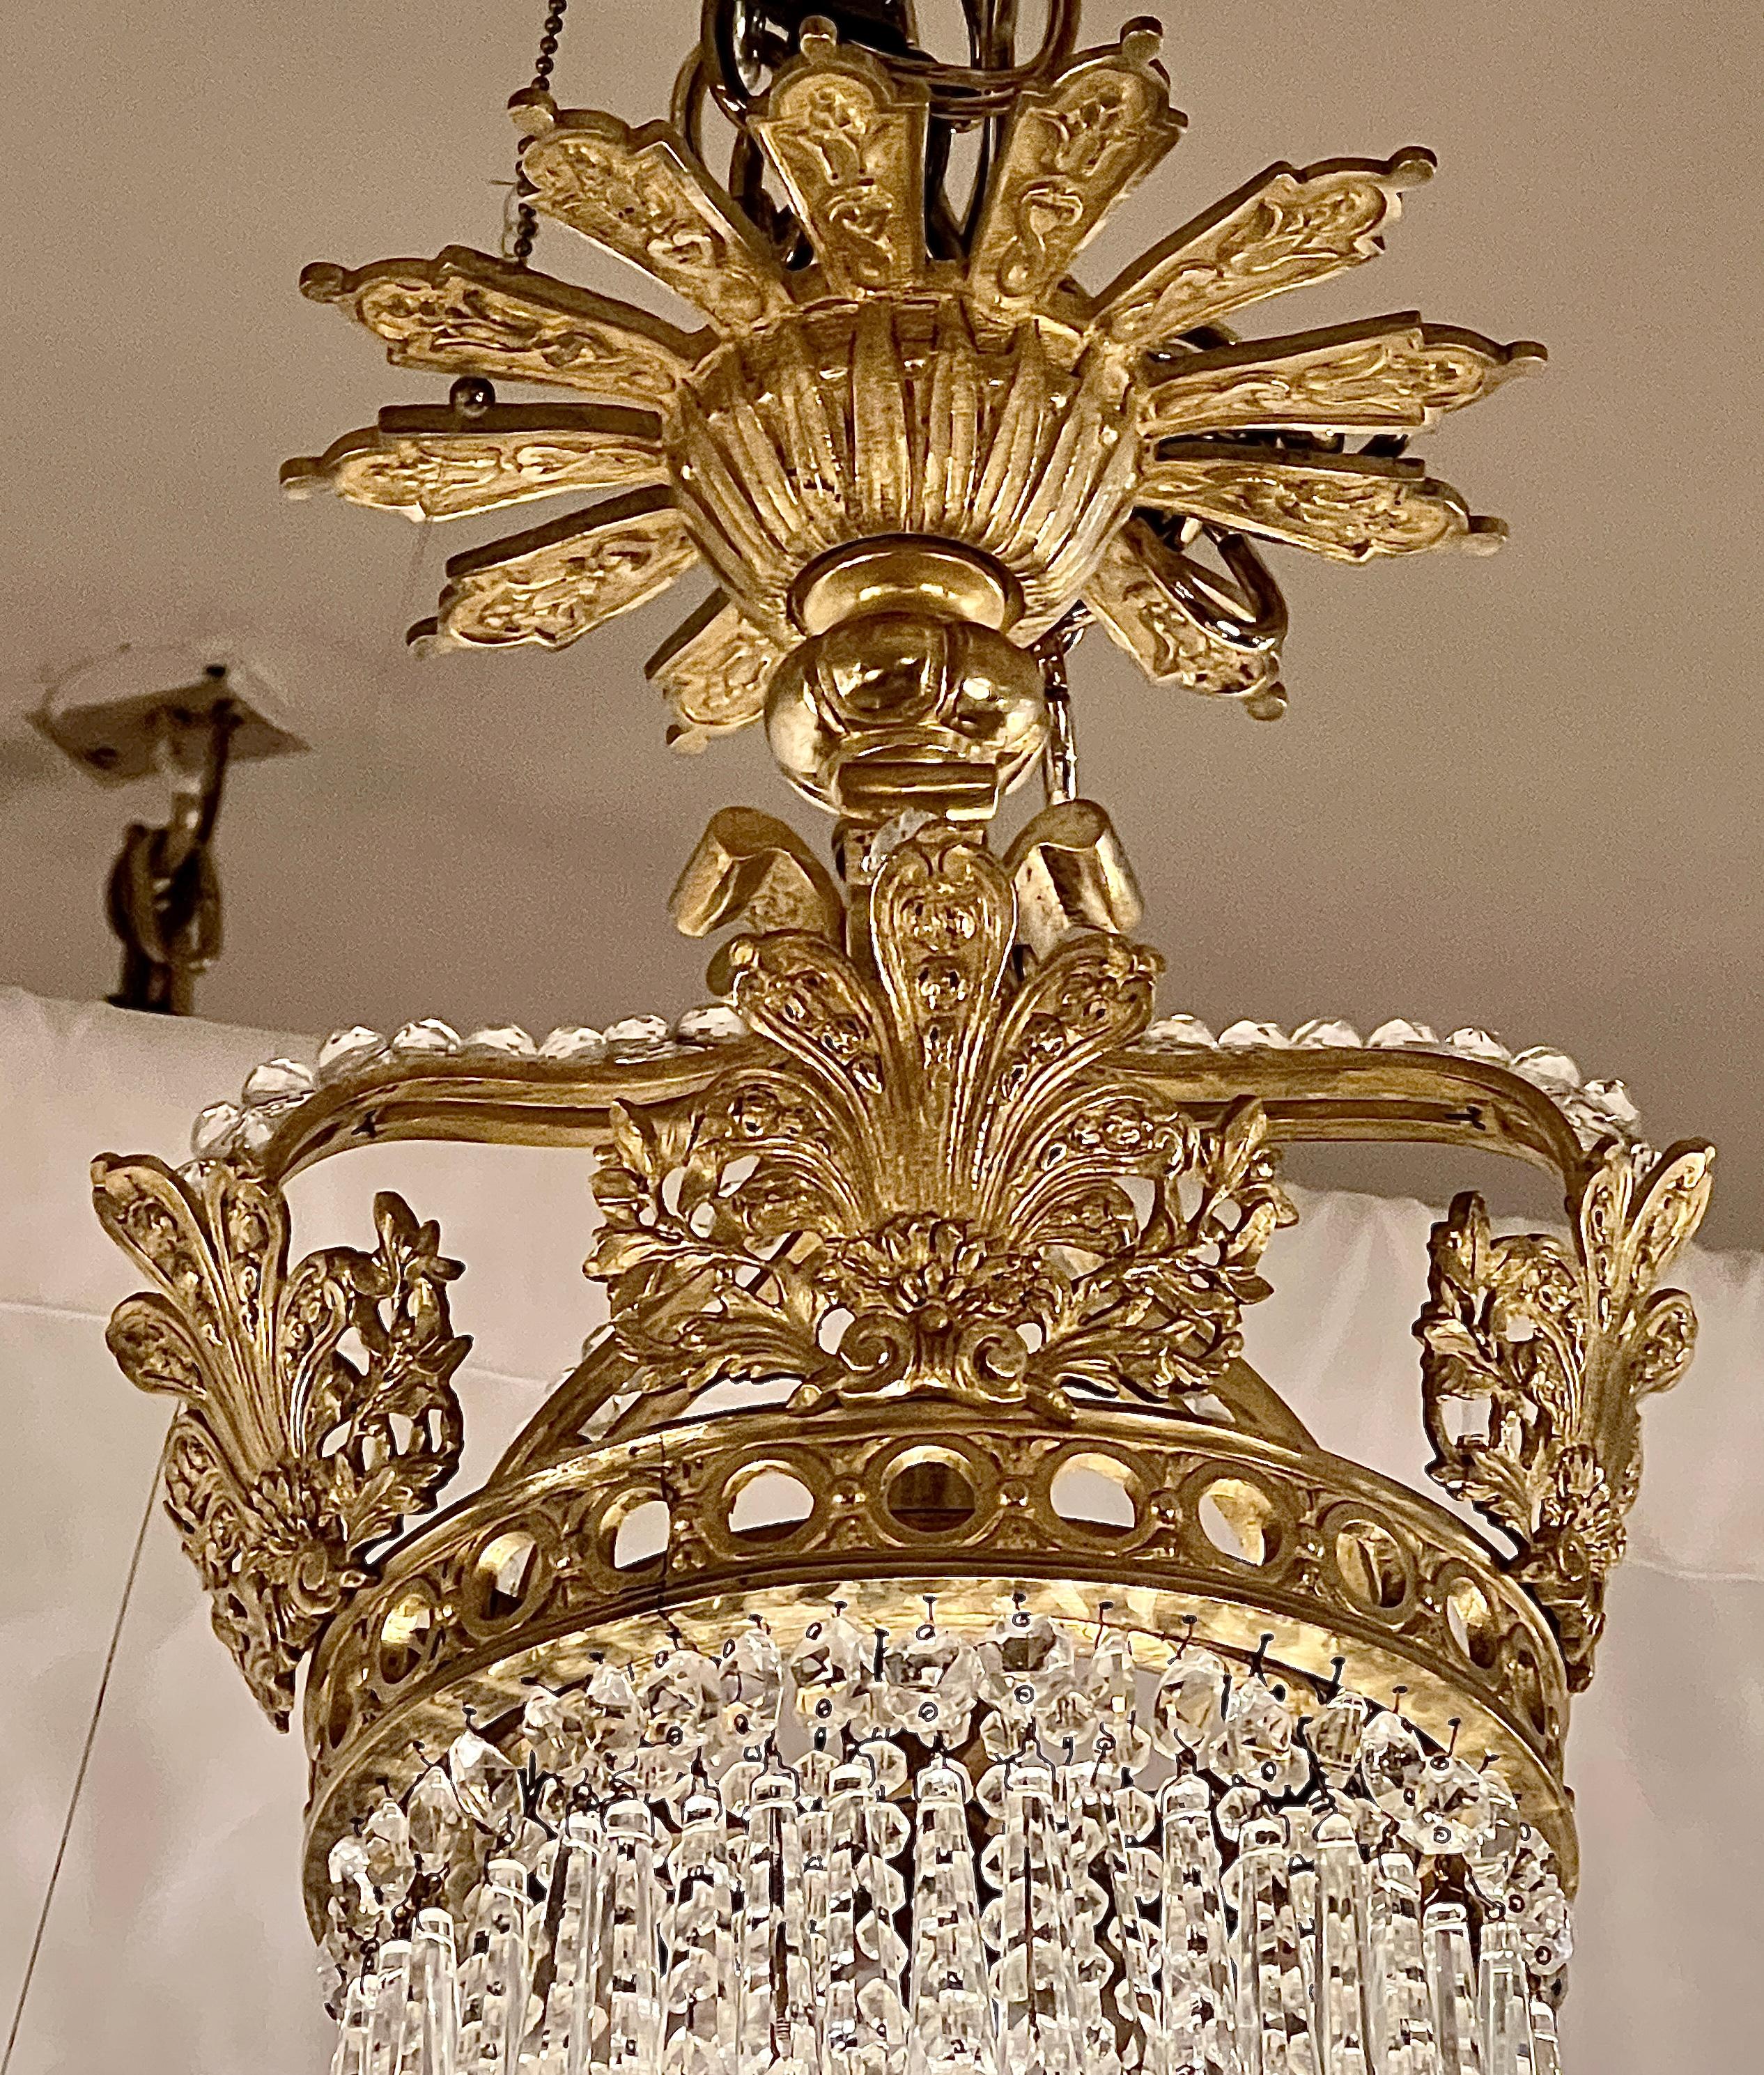 Antique 19th Century French Baccarat Crystal and Ormolu Chandelier, Circa 1890's In Good Condition For Sale In New Orleans, LA